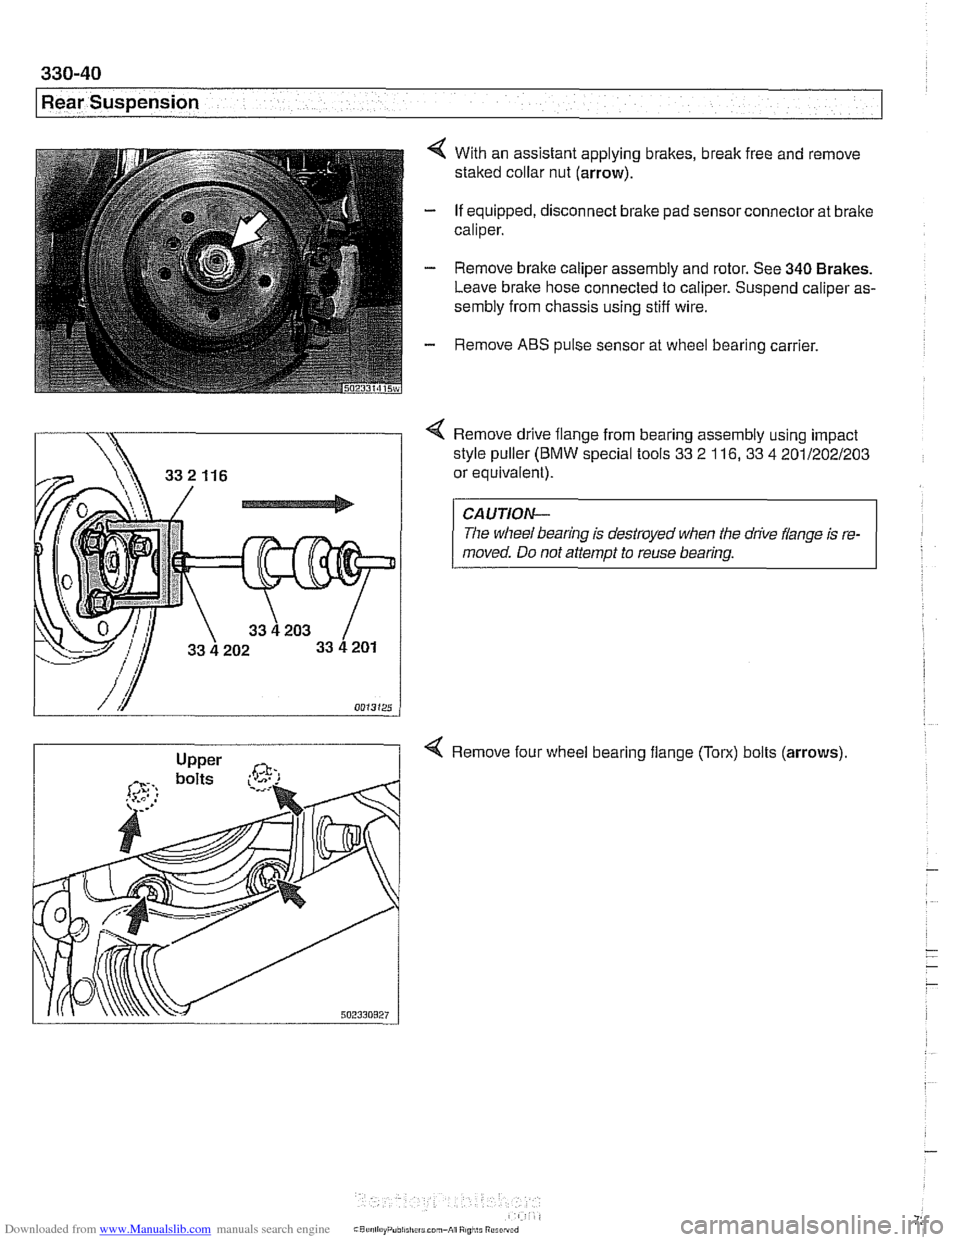 BMW 540i 1997 E39 User Guide Downloaded from www.Manualslib.com manuals search engine 
330-40 
Rear Suspension 
4 With an assistant applying brakes, break free and  remove 
staked  collar nut  (arrow). 
- If equipped,  disconnect